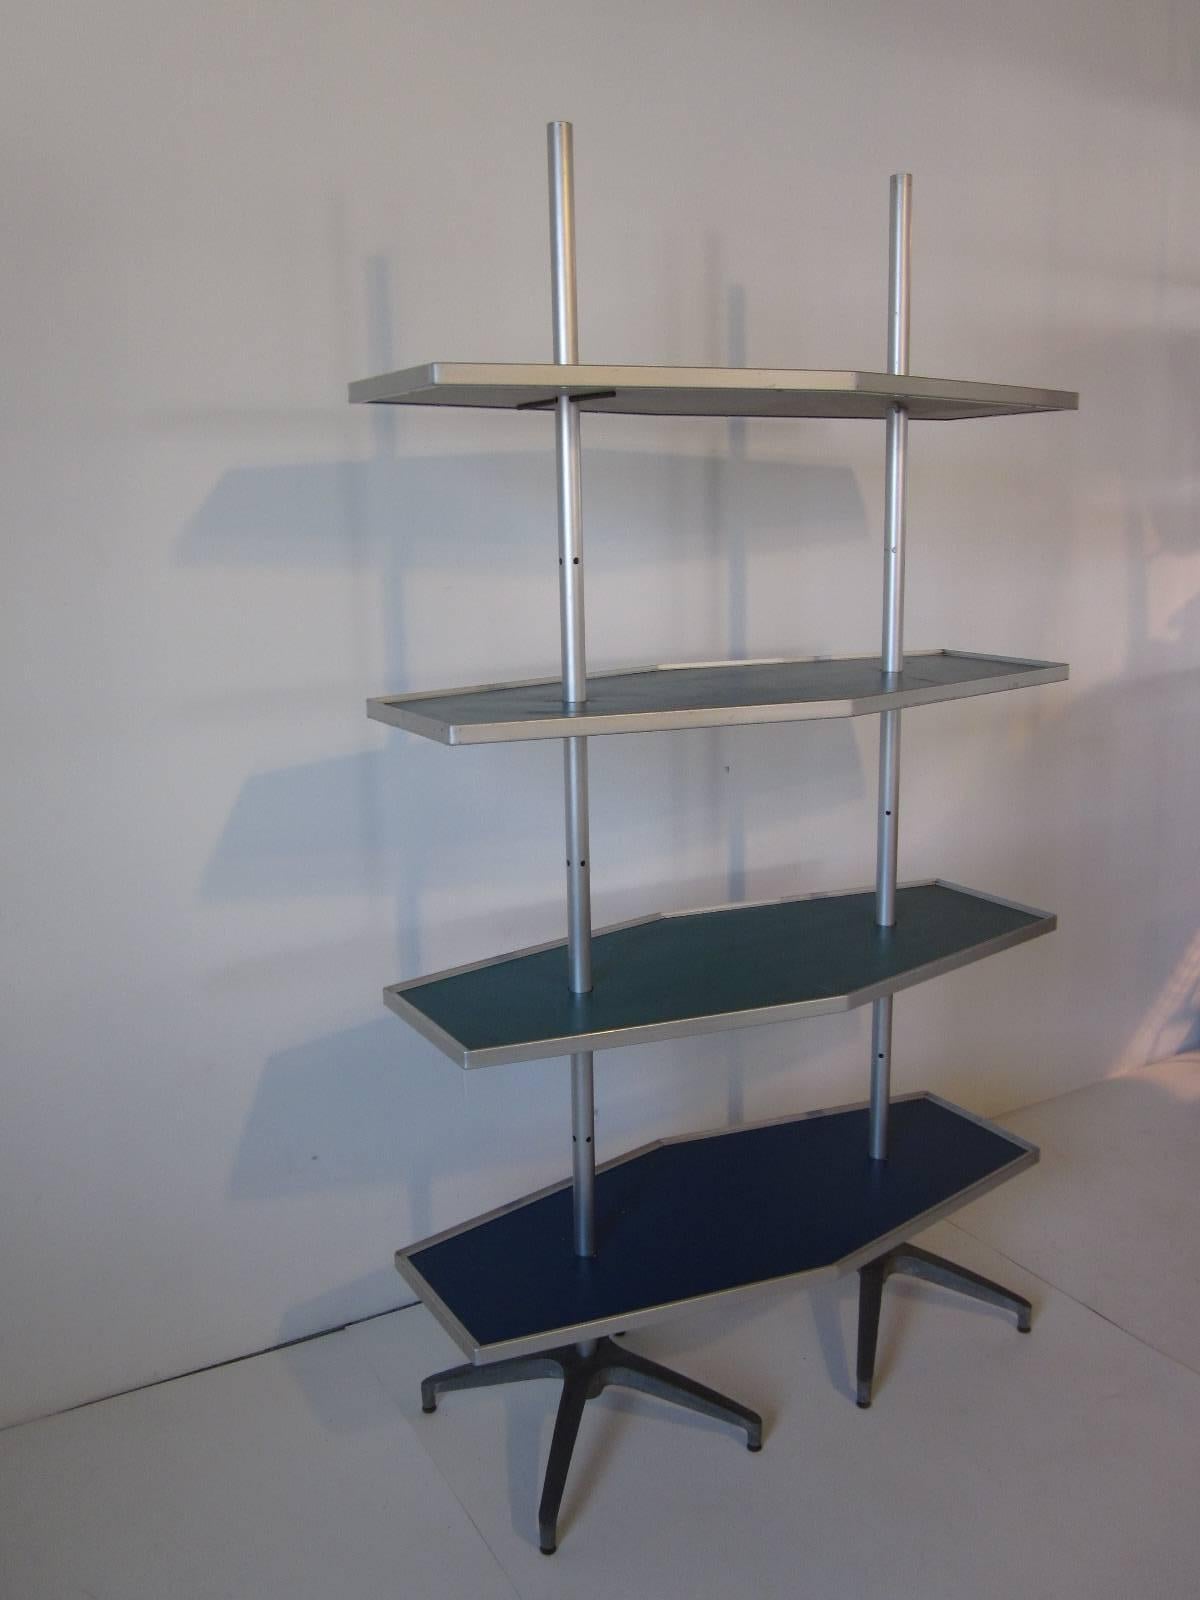 A Mid-Century modern industrial shelving unit used for displays with four mod shaped adjustable shelves, two in turquoise and two in dark blue with aluminum trim. Matching aluminum poles with shelve pins slip into the star bases and all this breaks